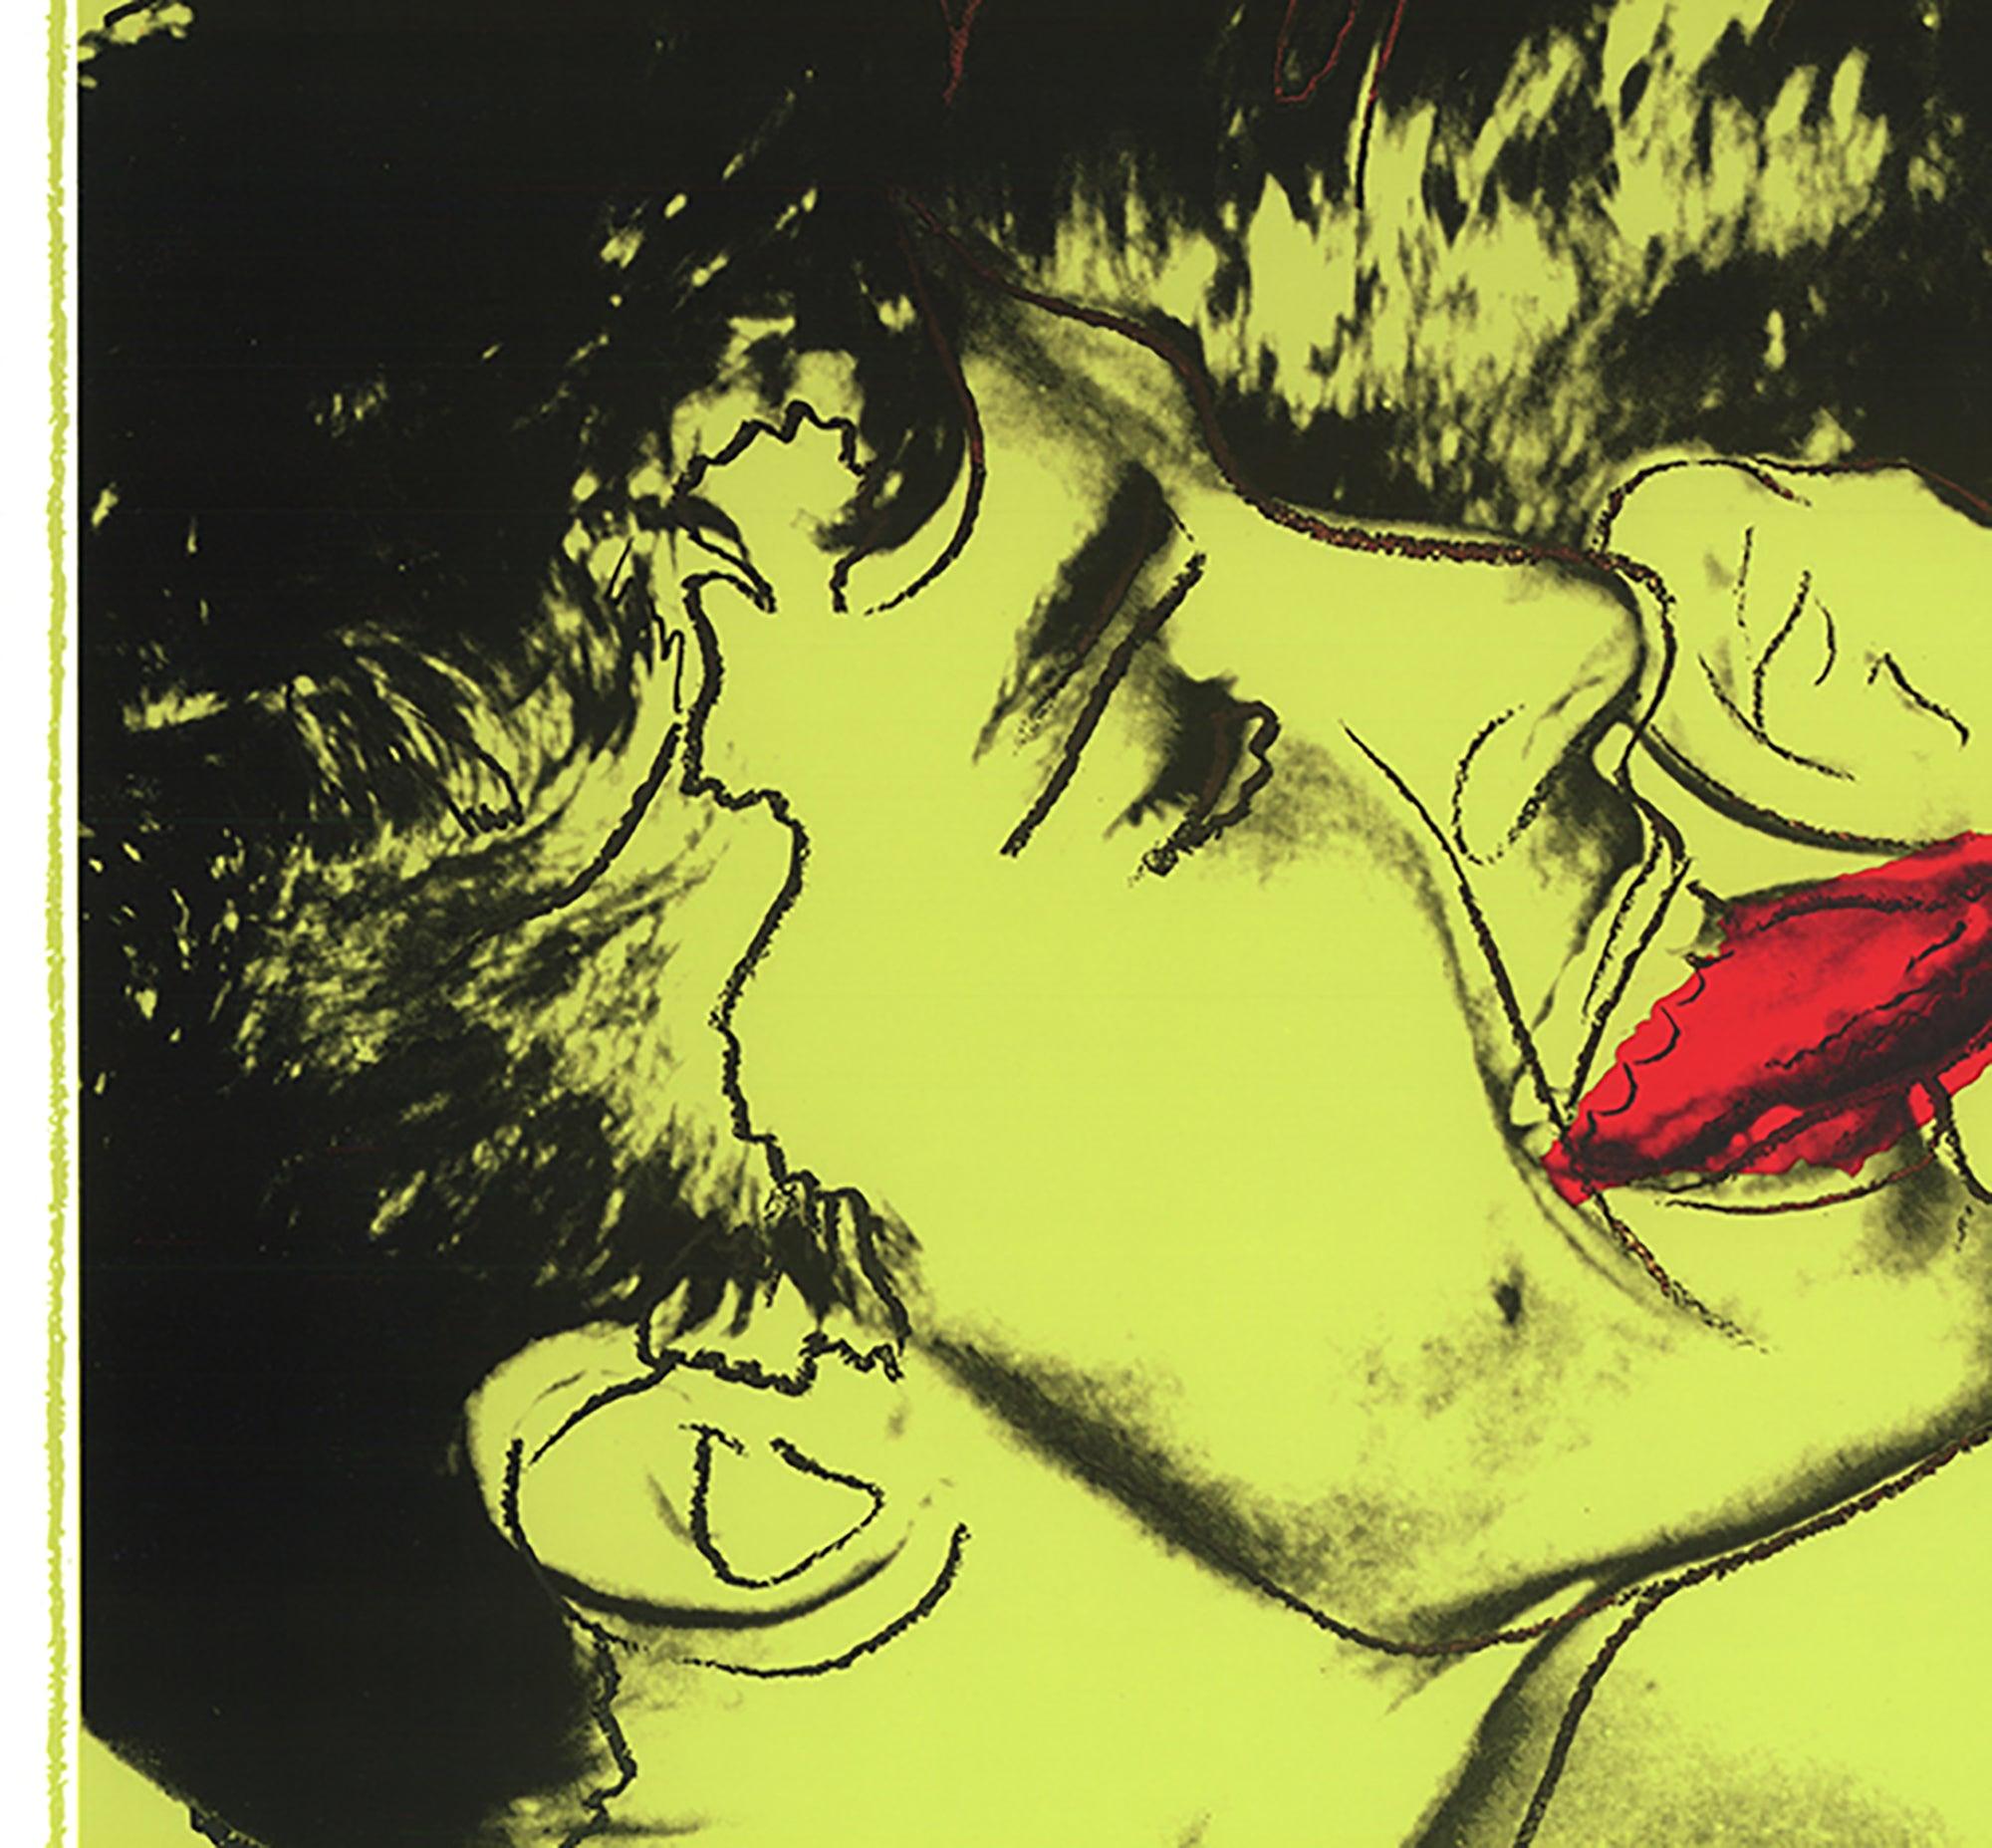 Artist: Andy Warhol
Title: Querelle Green
Year: 1983
Signed: No
Medium: Offset Lithograph
Paper Size: 39.25 x 27.5 inches ( 99.695 x 69.85 cm )
Image Size: 26.5 x 26.5 inches ( 67.31 x 67.31 cm )
Edition Size: Unknown
Framed: No
Condition: A: